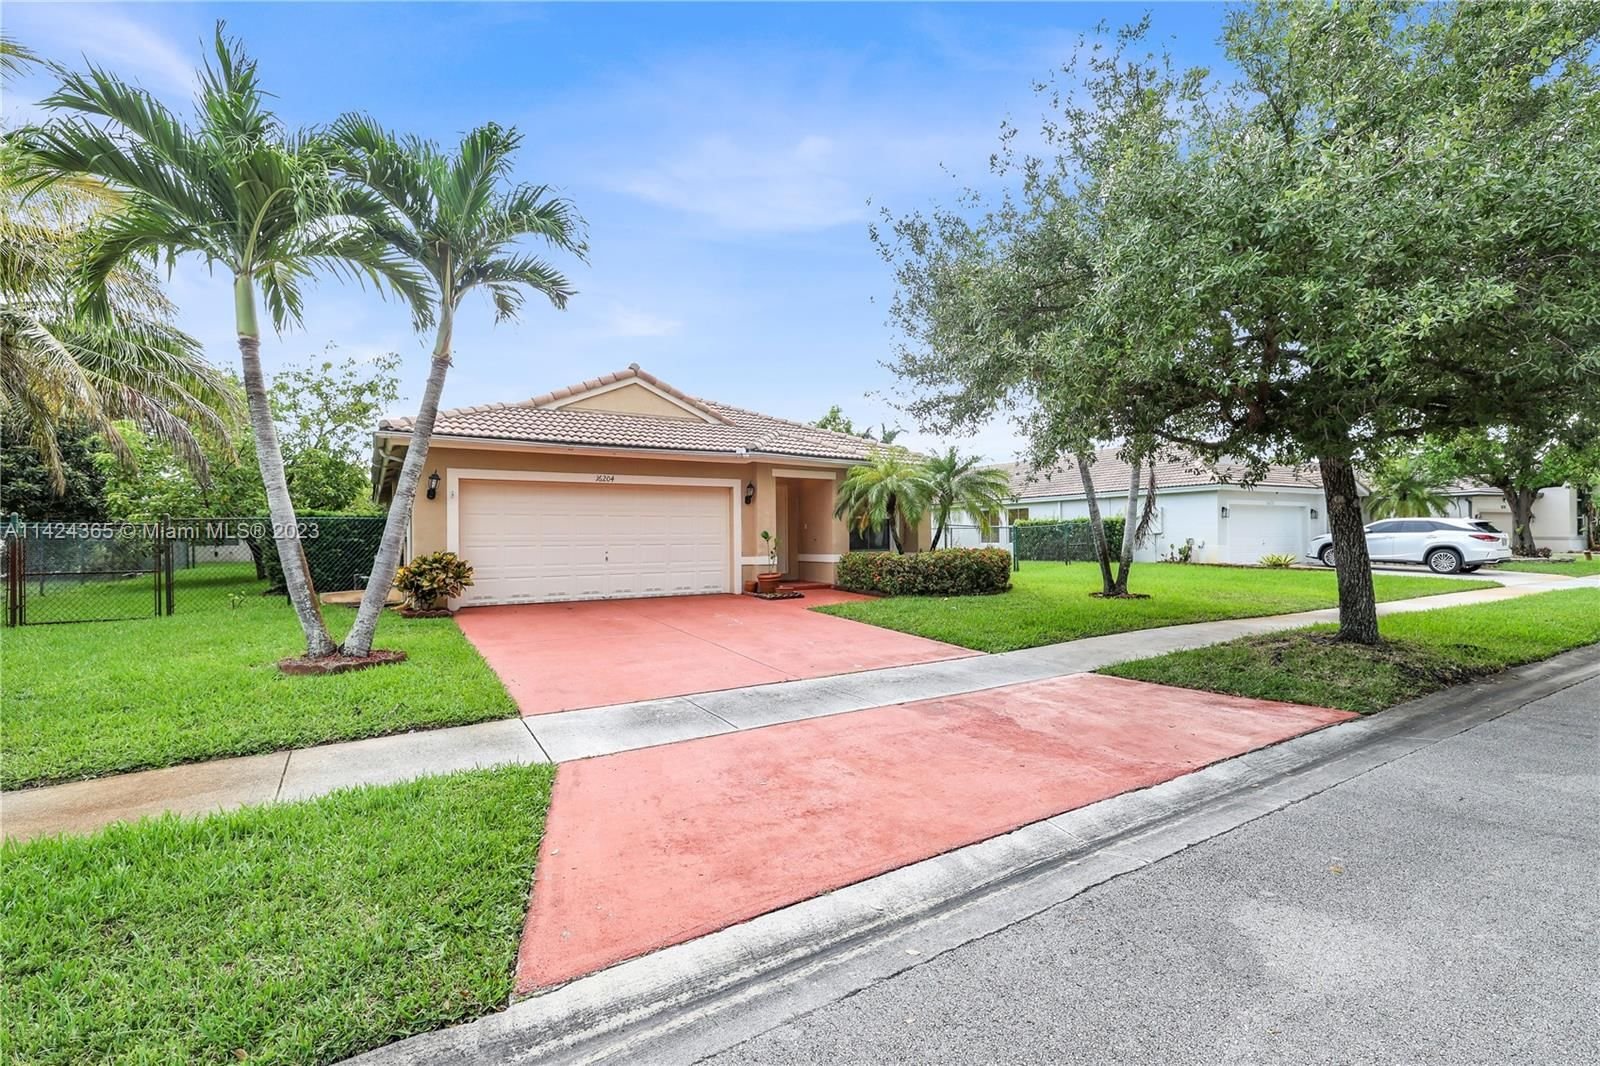 Real estate property located at 16204 10th St, Broward County, Pembroke Pines, FL